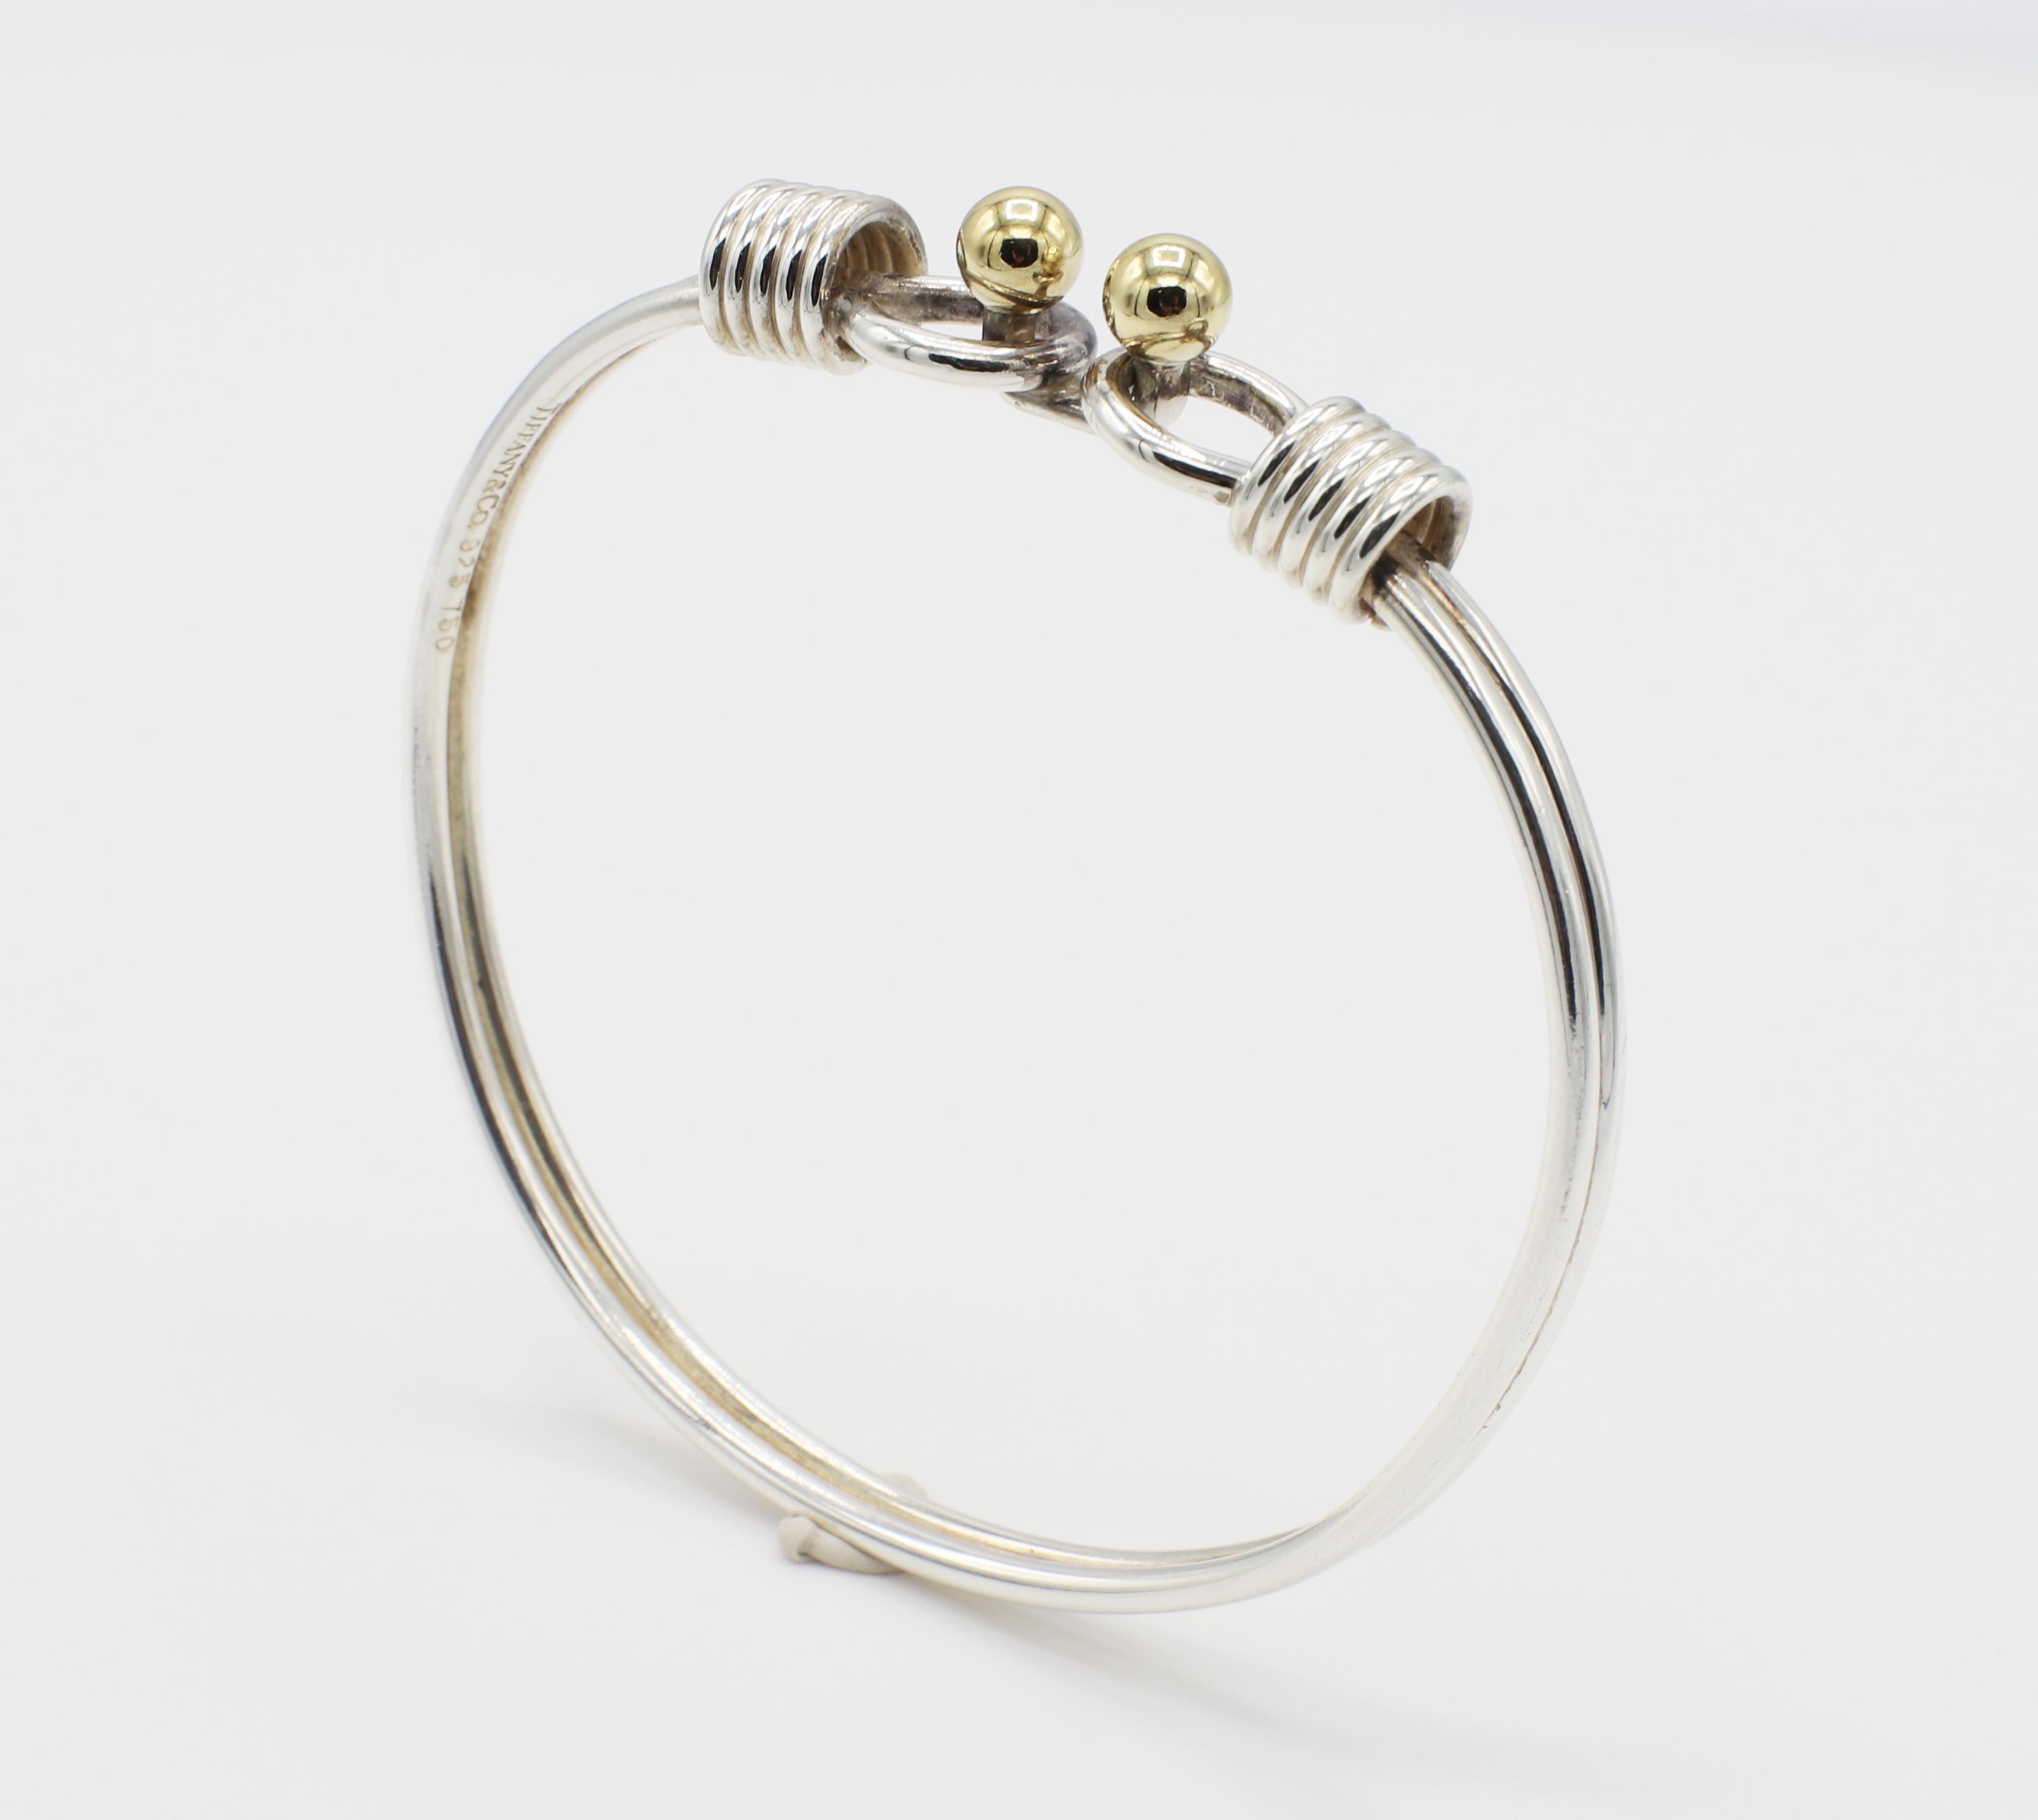 Contemporary Tiffany & Co. Sterling Silver & 18 Karat Yellow Gold Double Ball Bangle Bracelet